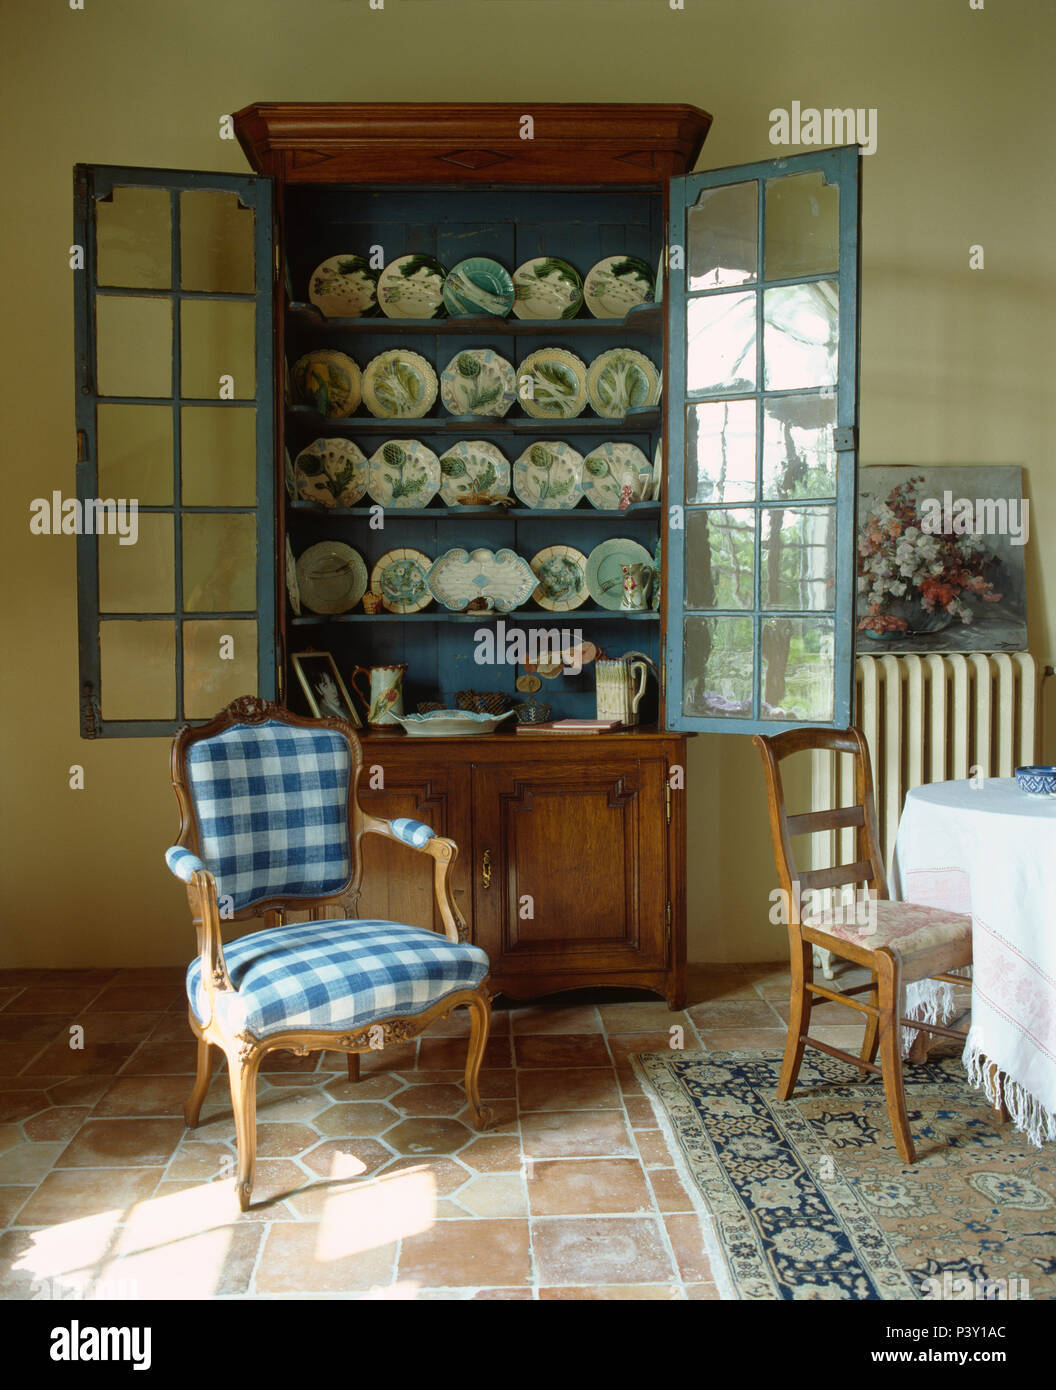 Blue+white checked upholstered Louis chair in front of antique glass front dresser in French dining room Stock Photo